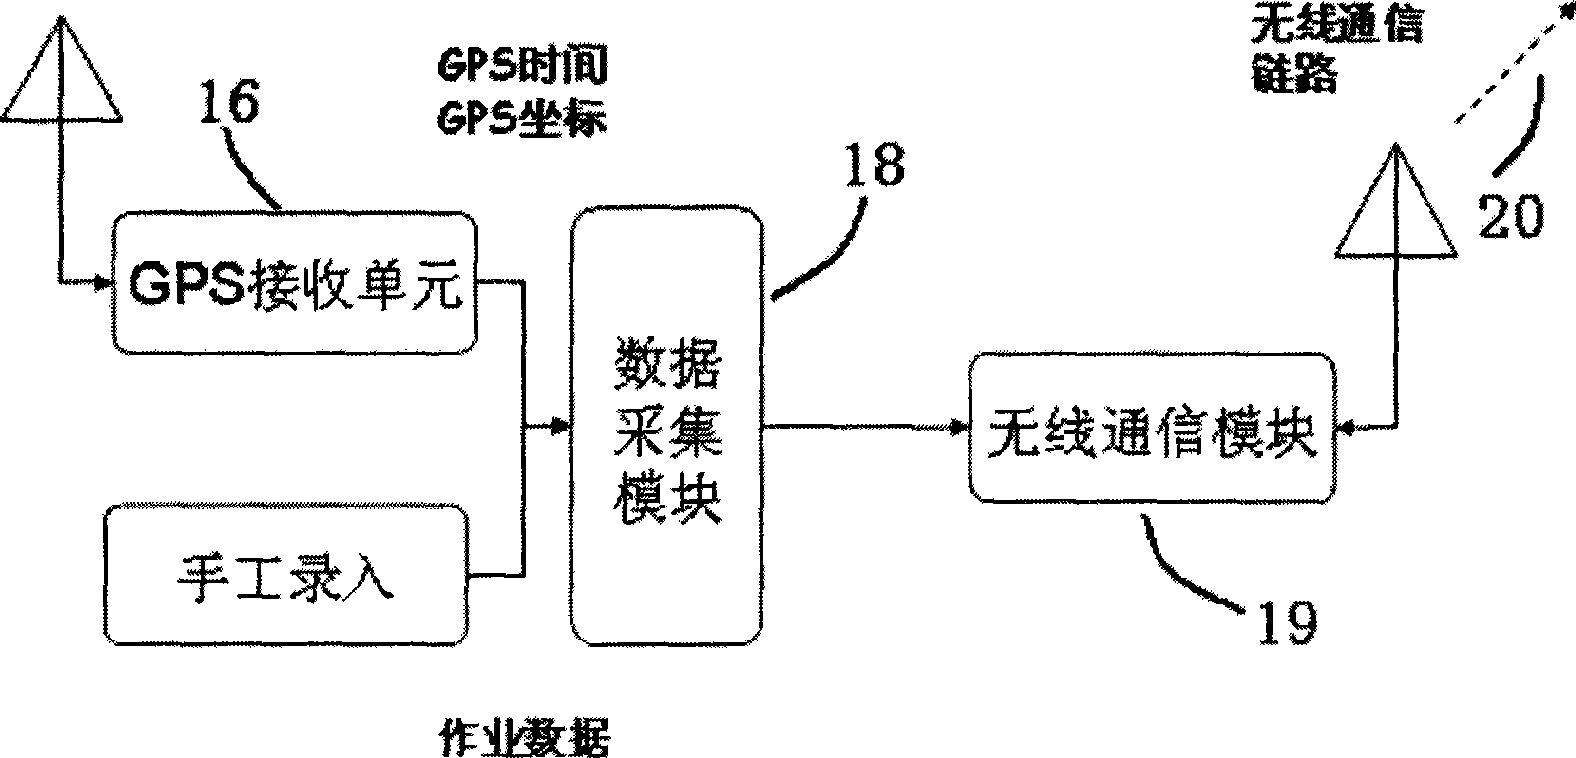 Data acquisition system and method based on GPS and website map server